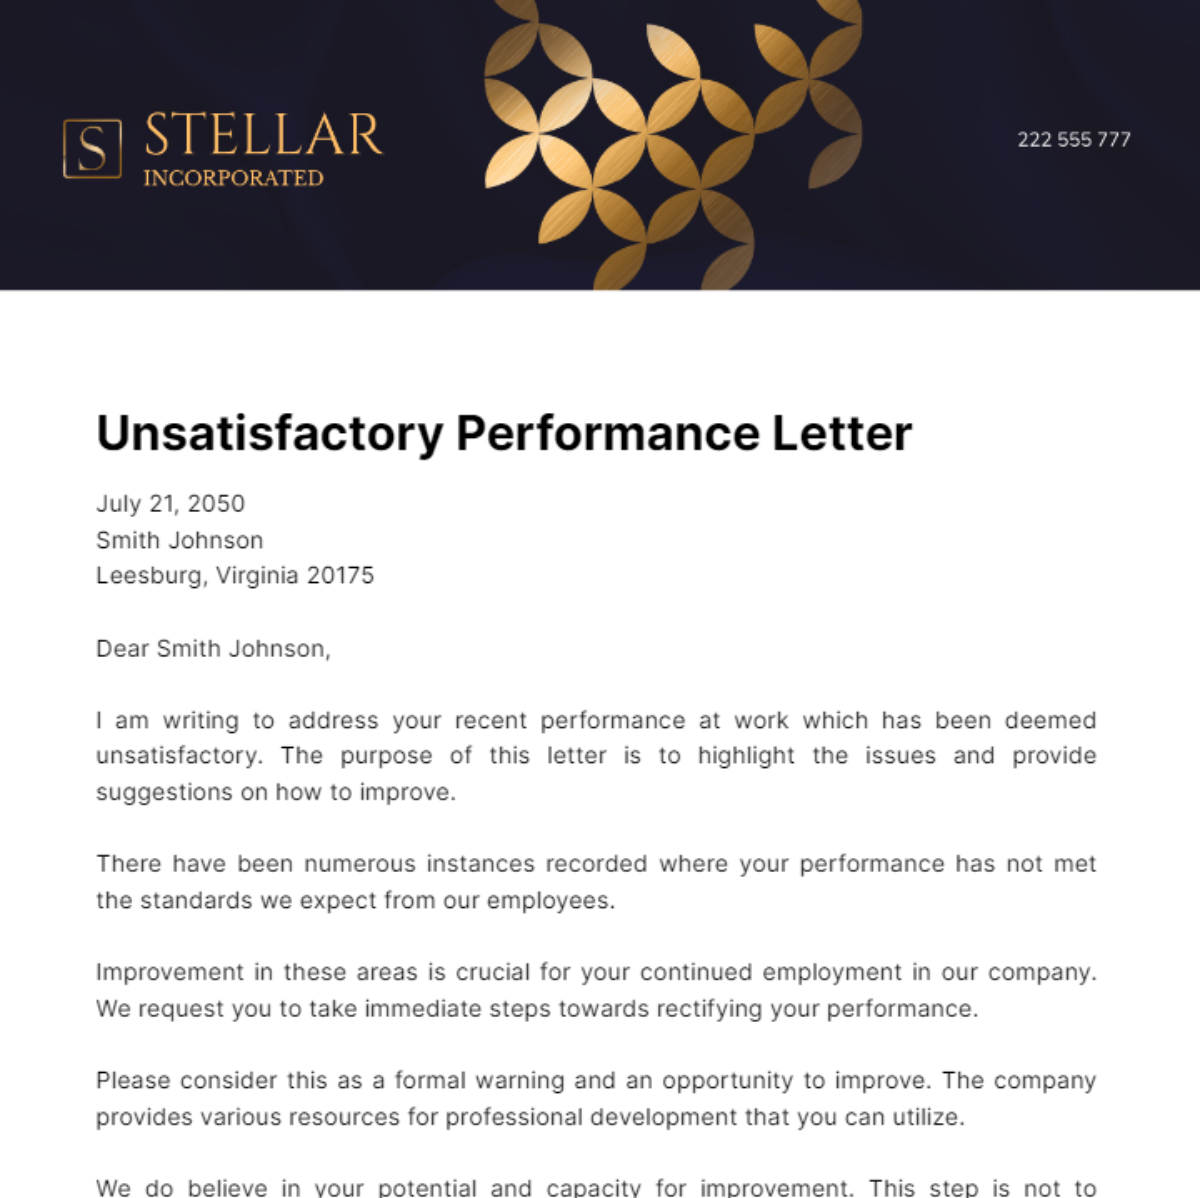 Unsatisfactory Performance Letter for Employee Template